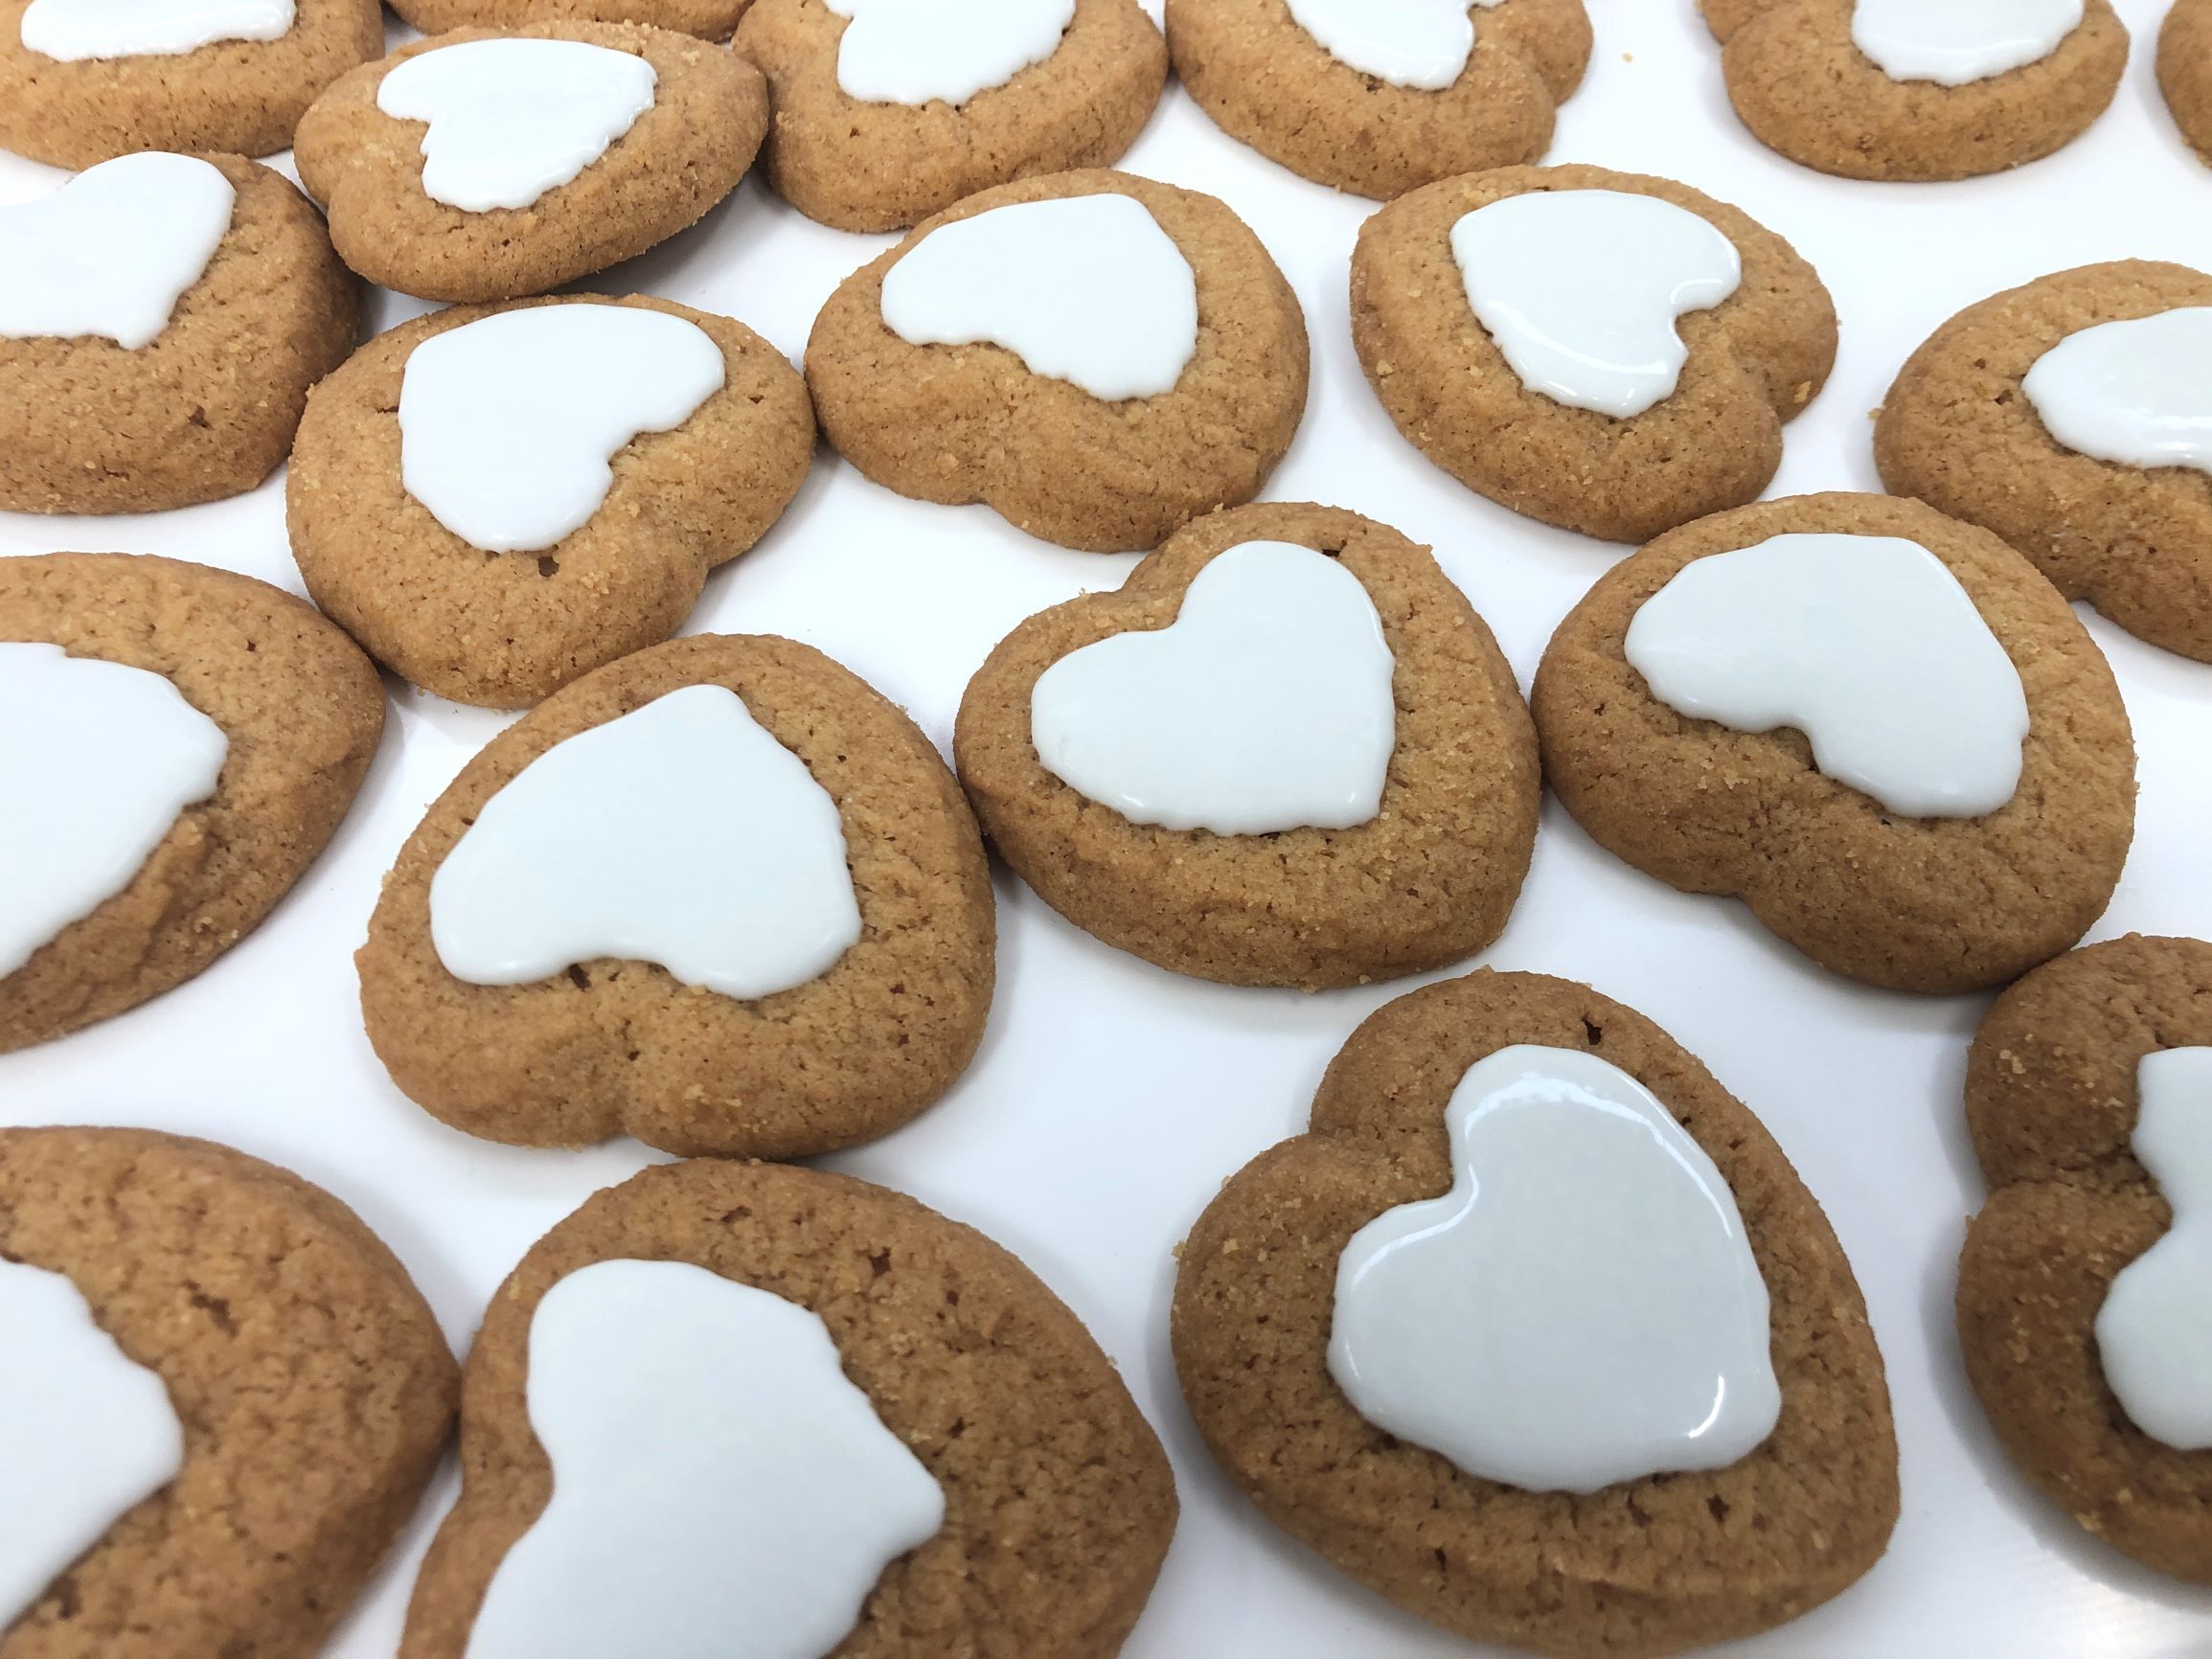 Heart-shaped biscuits with white chocolate hearts deposited in the center by FoodJet chocolate depositor